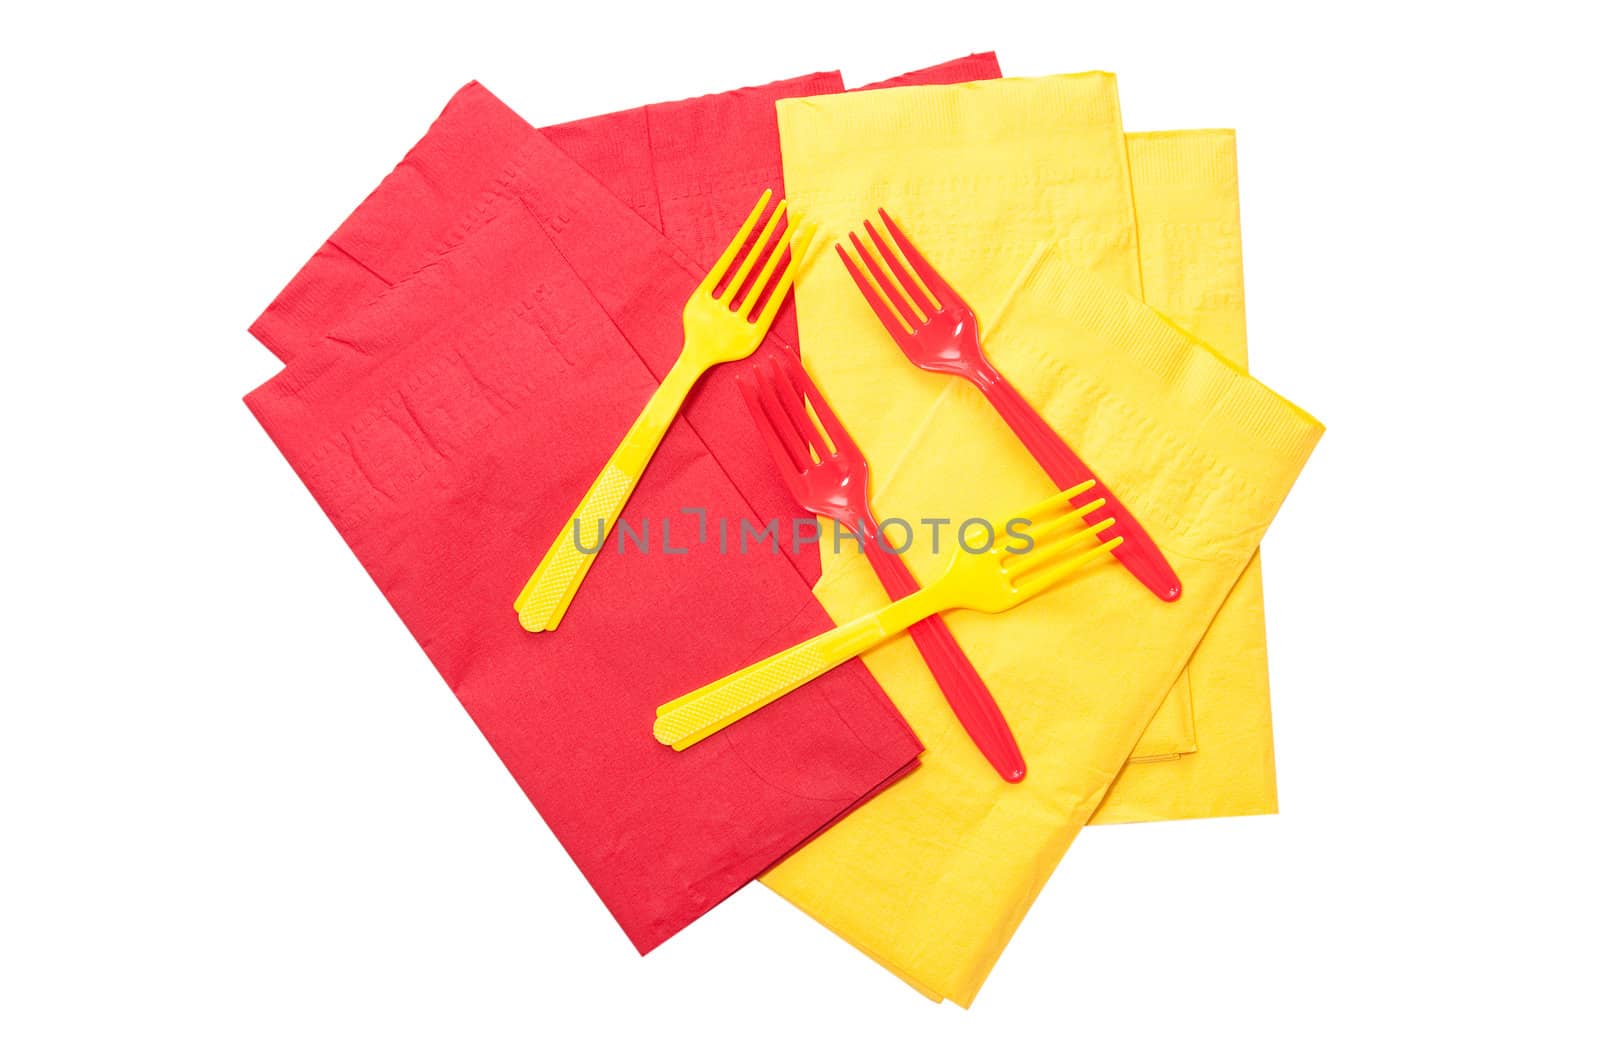 Plastic forks and napkins isolated on white background with clipping path.